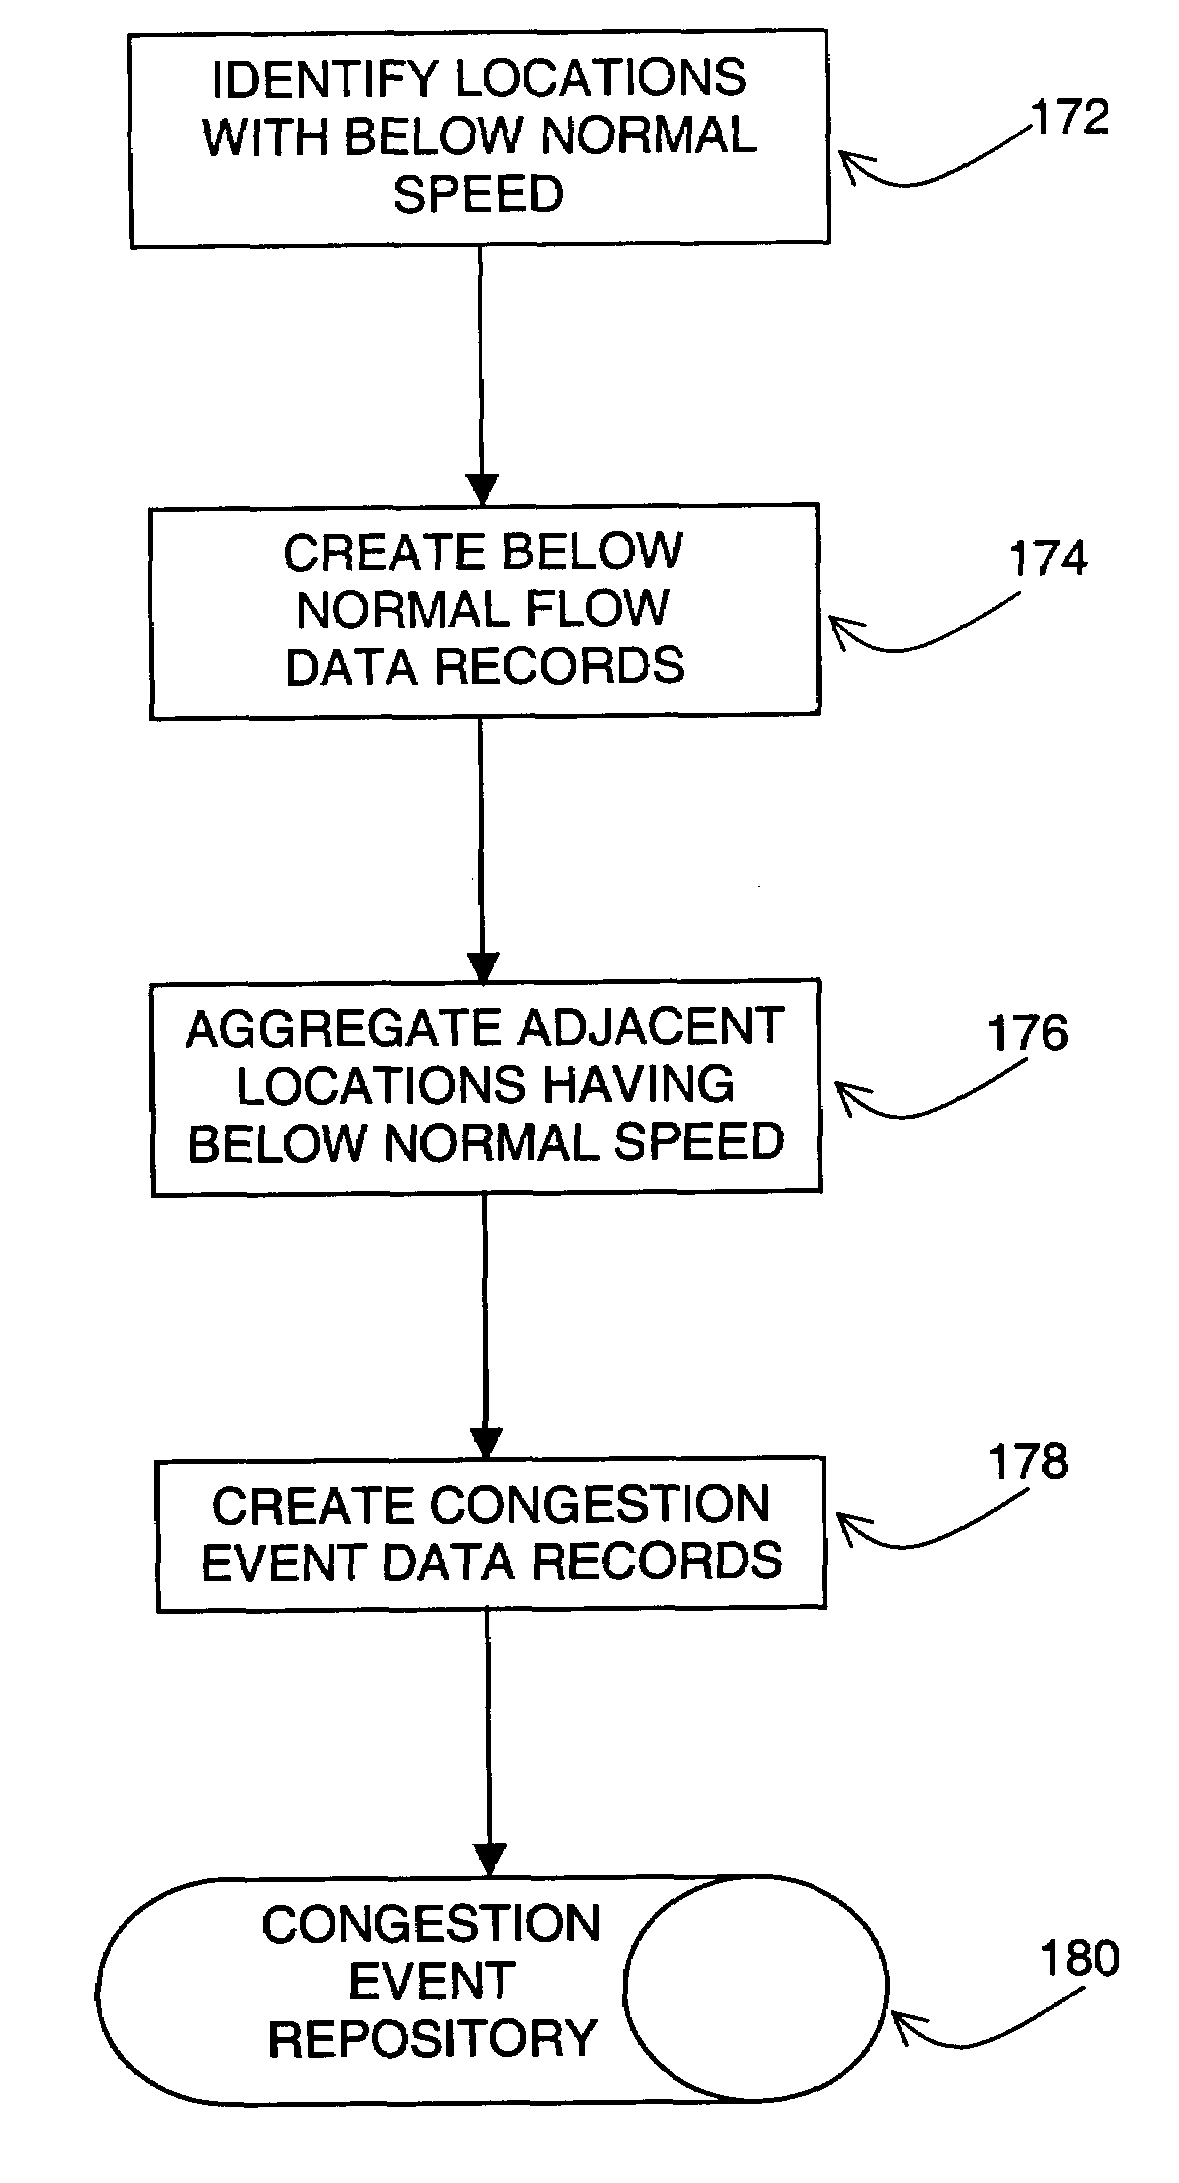 Method and system for developing traffic messages